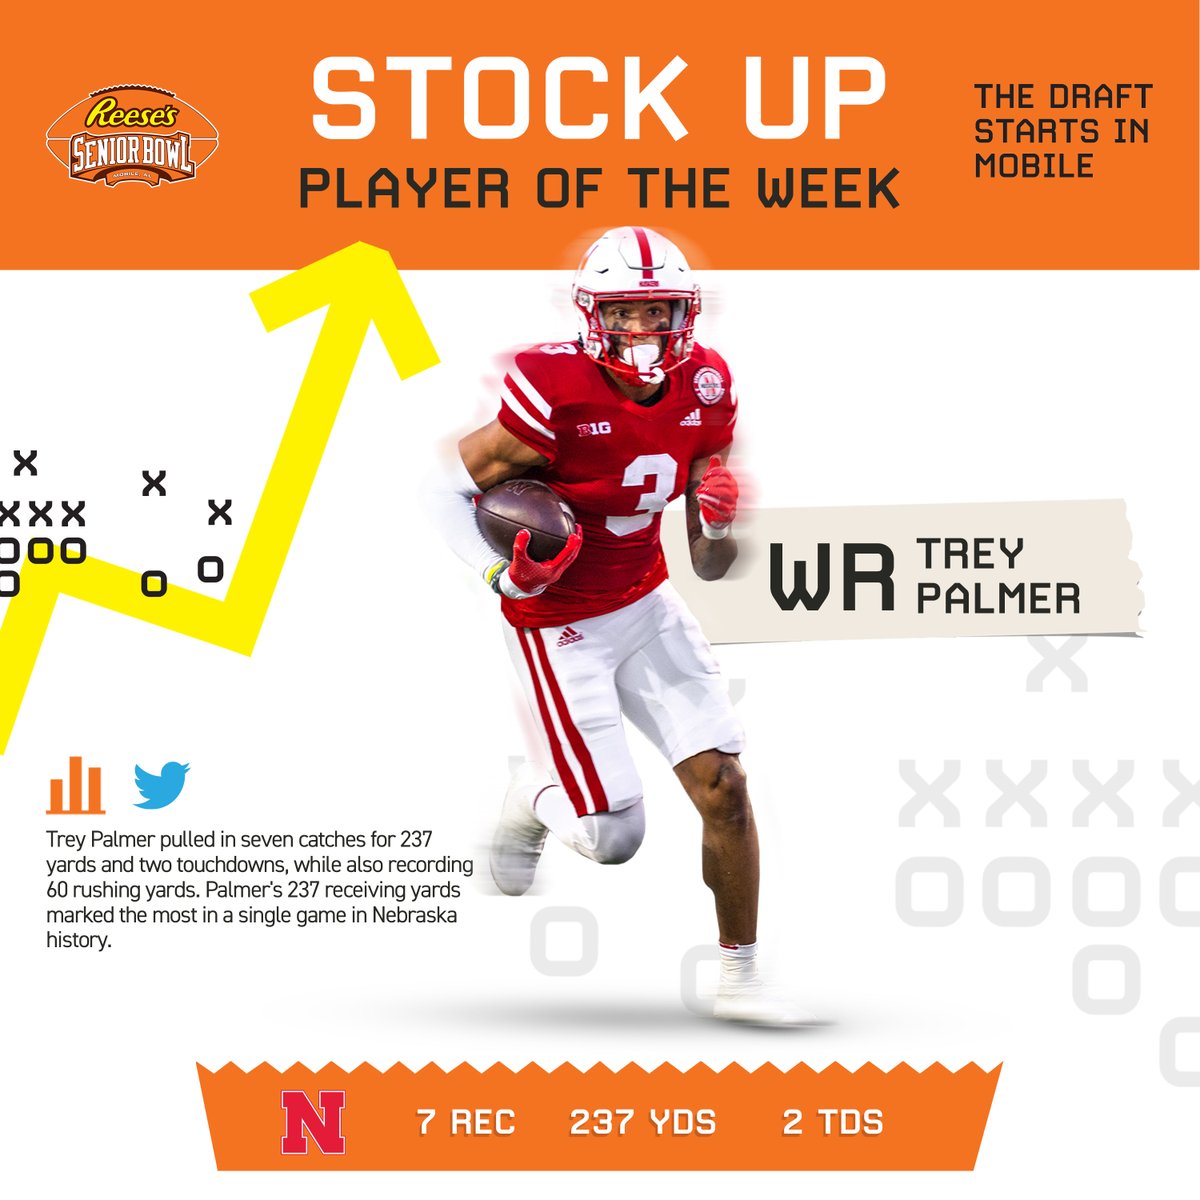 📈📈📈WR Trey Palmer @treythekiid3 from @HuskerFBNation brought in 7 receptions for 237 yards and 2 TDs over the weekend. Also racked up 60 rushing yards. #Huskers #GBR #StocksGoingUp #TheDraftStartsInMOBILE™️